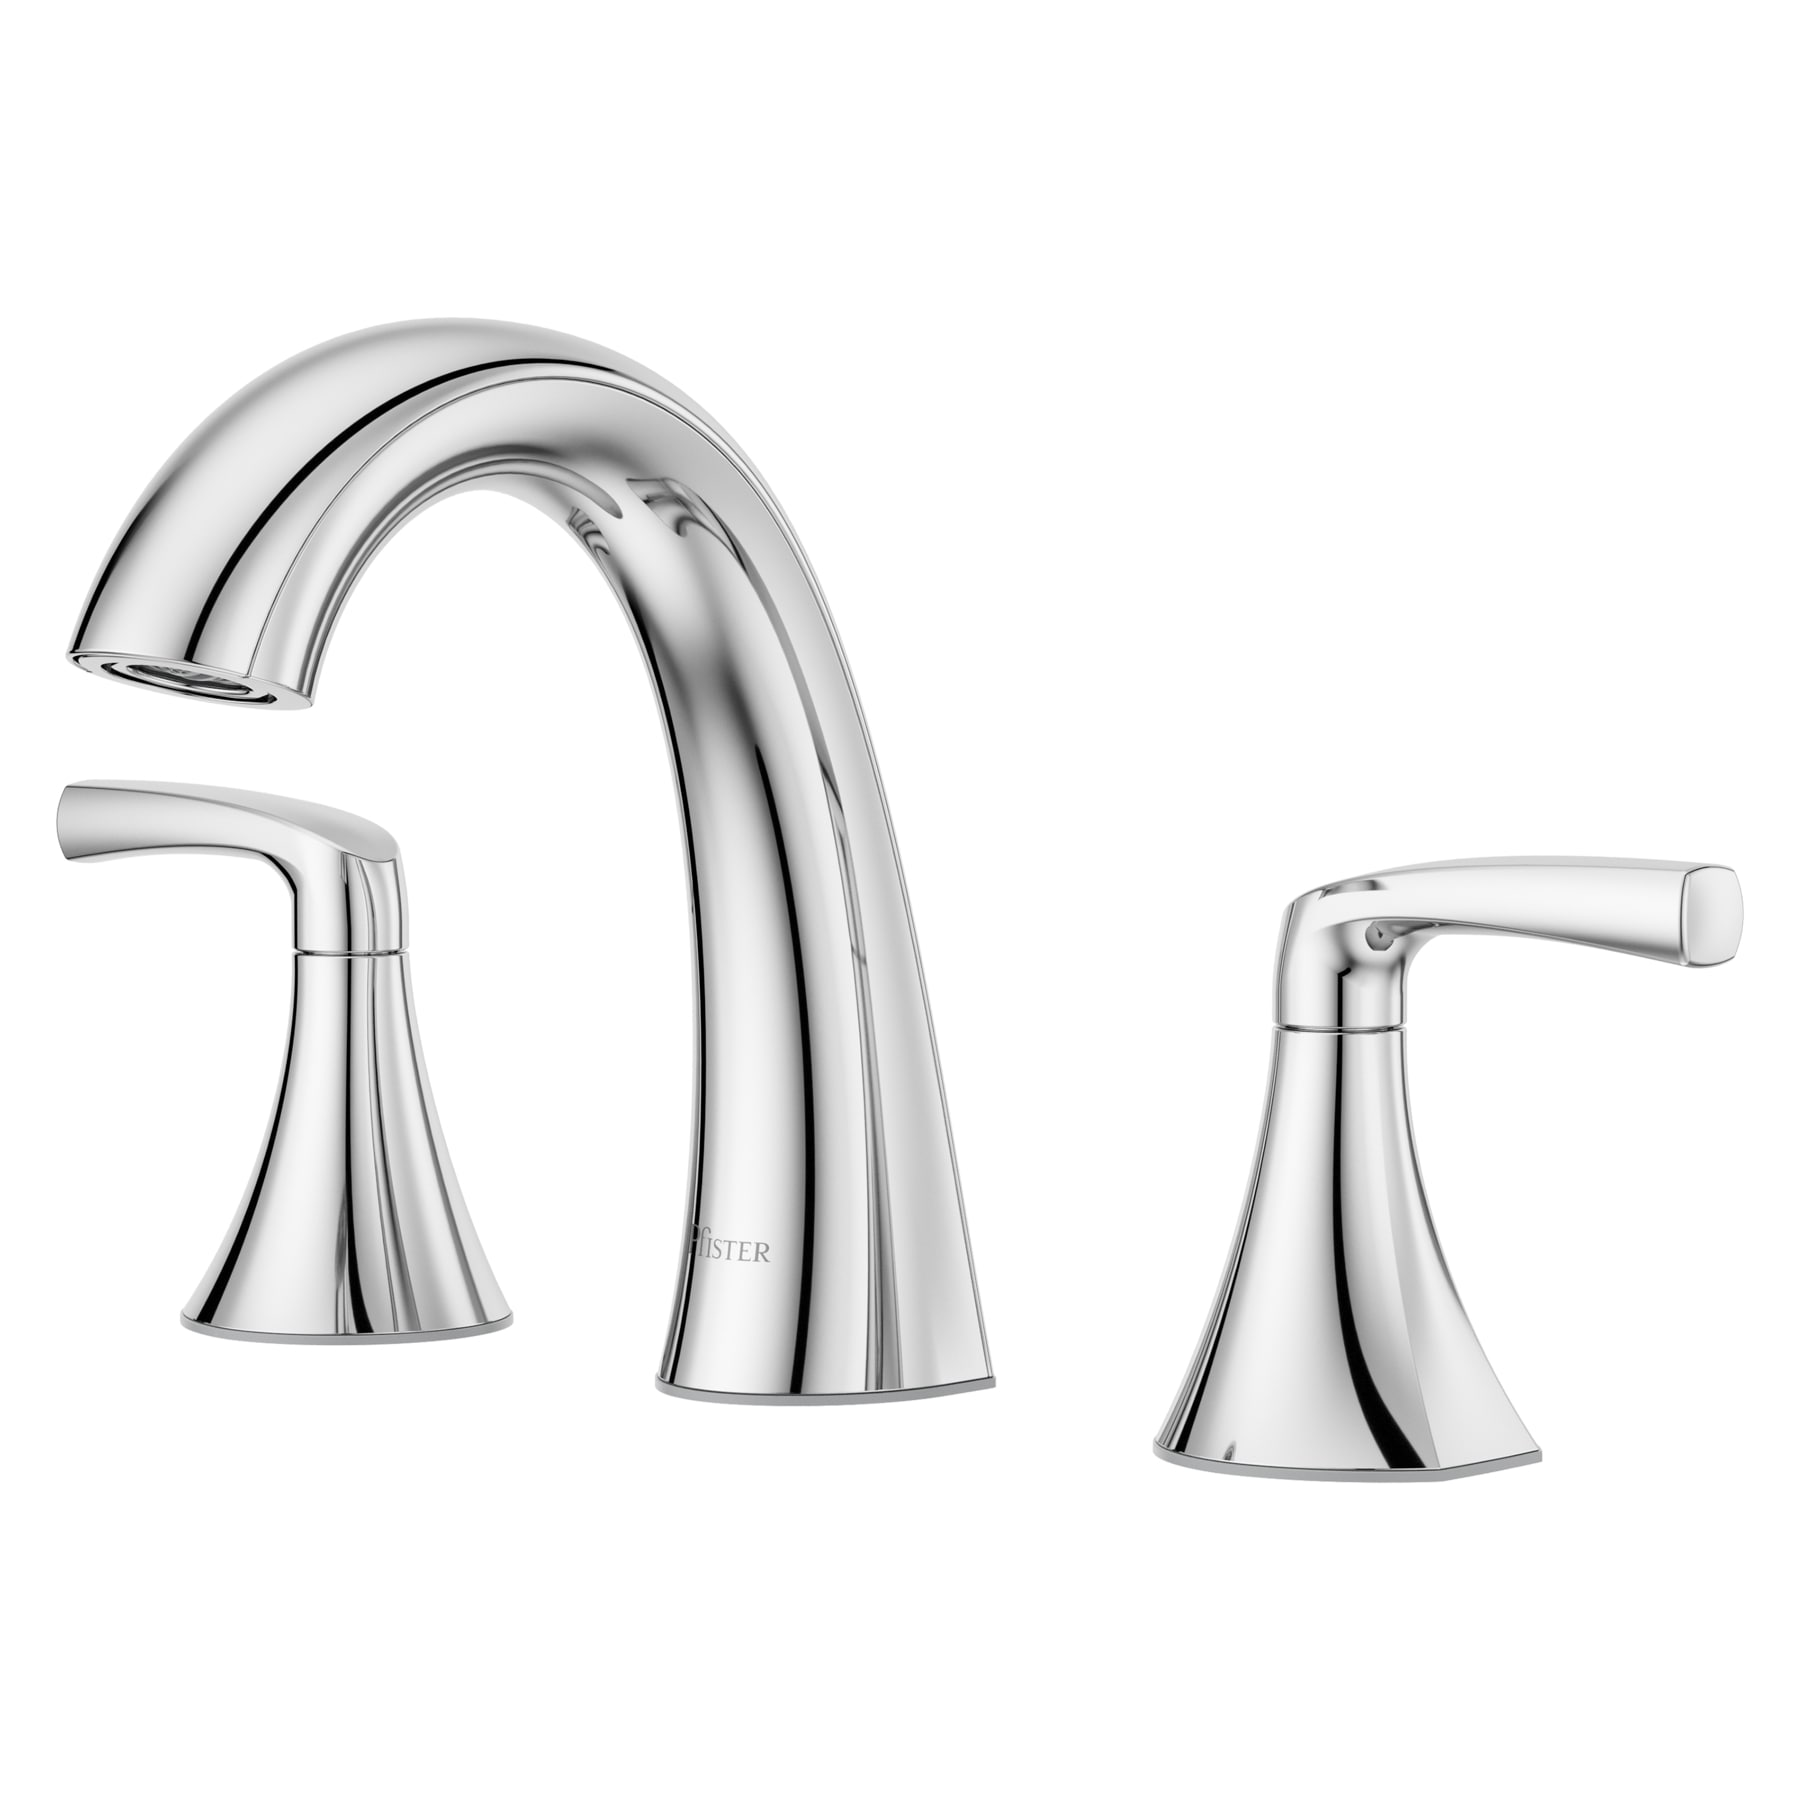 Pfister Rancho Polished Chrome 2-handle Widespread WaterSense Mid-arc  Bathroom Sink Faucet with Drain